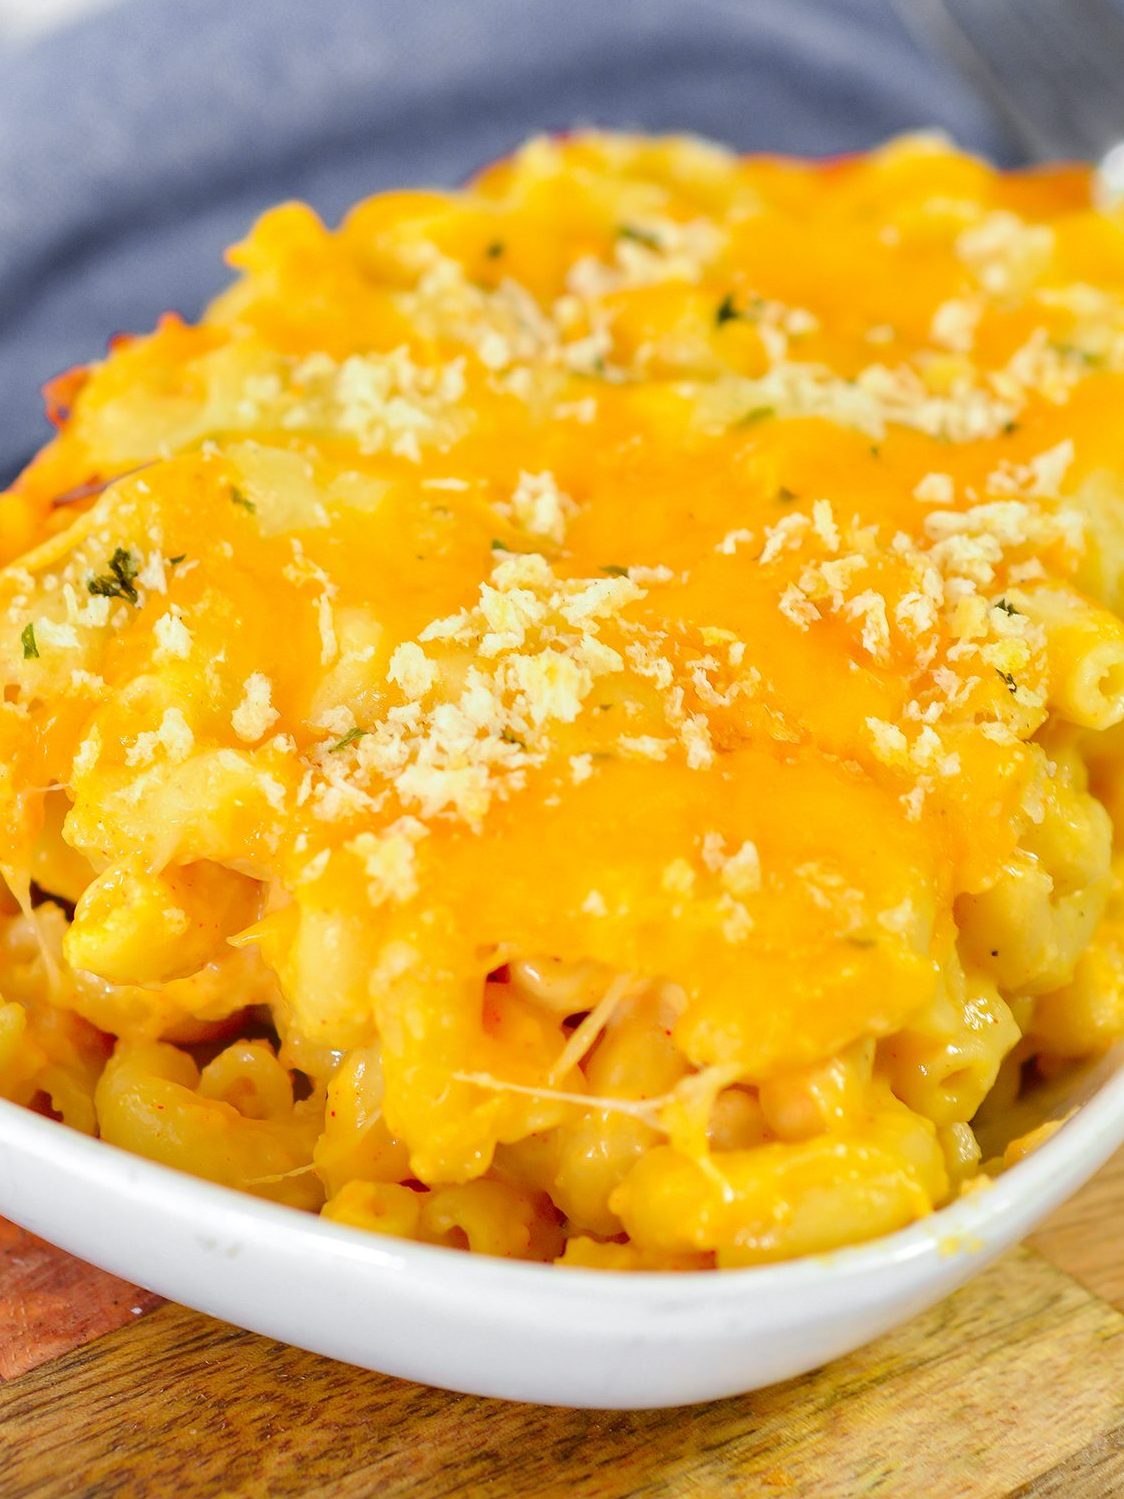 Creamy Baked Macaroni and Cheese, Creamy Baked Macaroni and Cheese recipe, Macaroni and Cheese